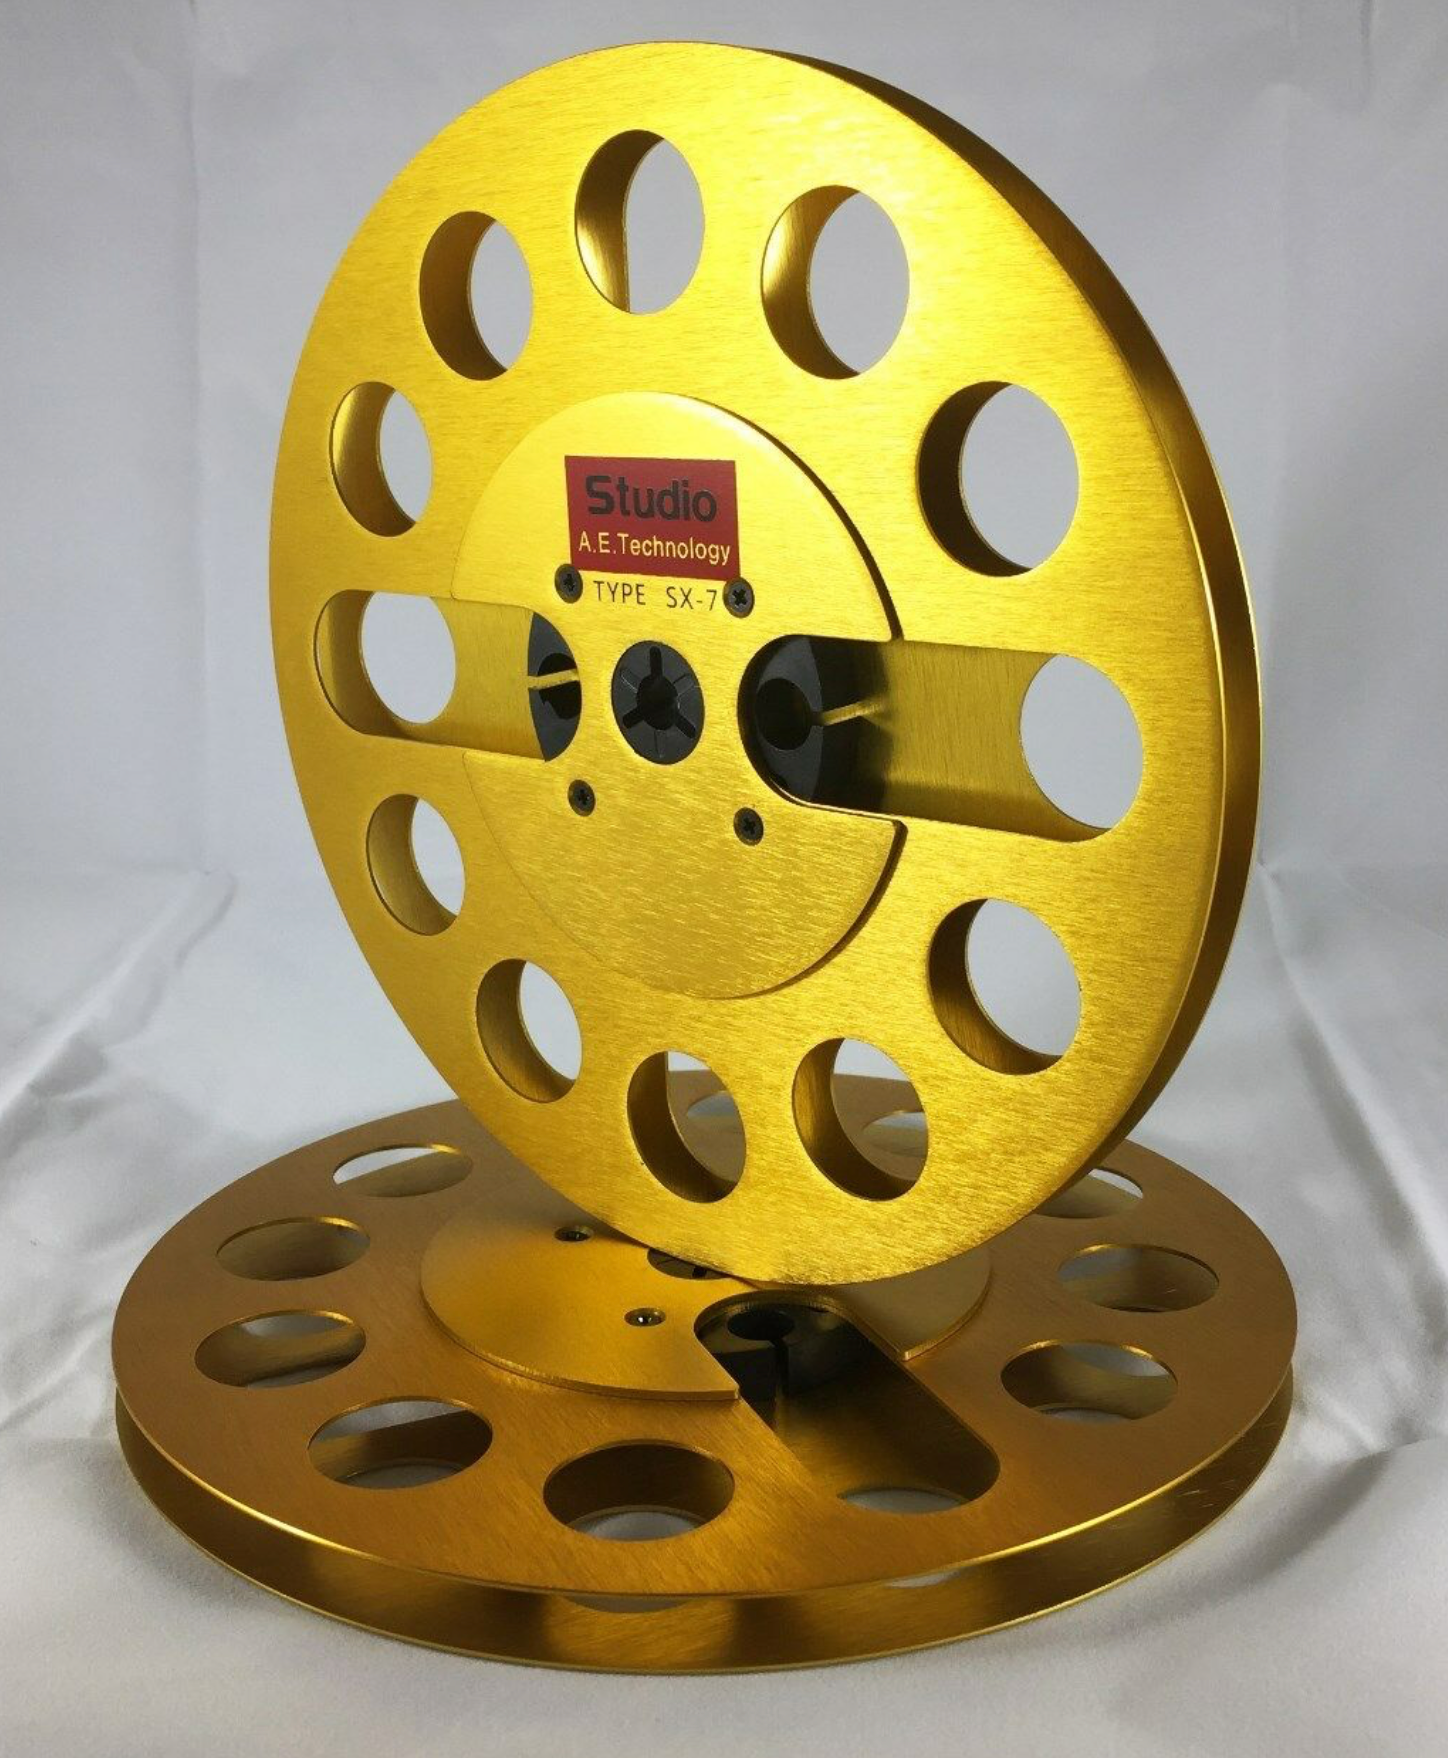 7" Anodized Aluminum metal Reel to Reels - ONE PAIR - Gold